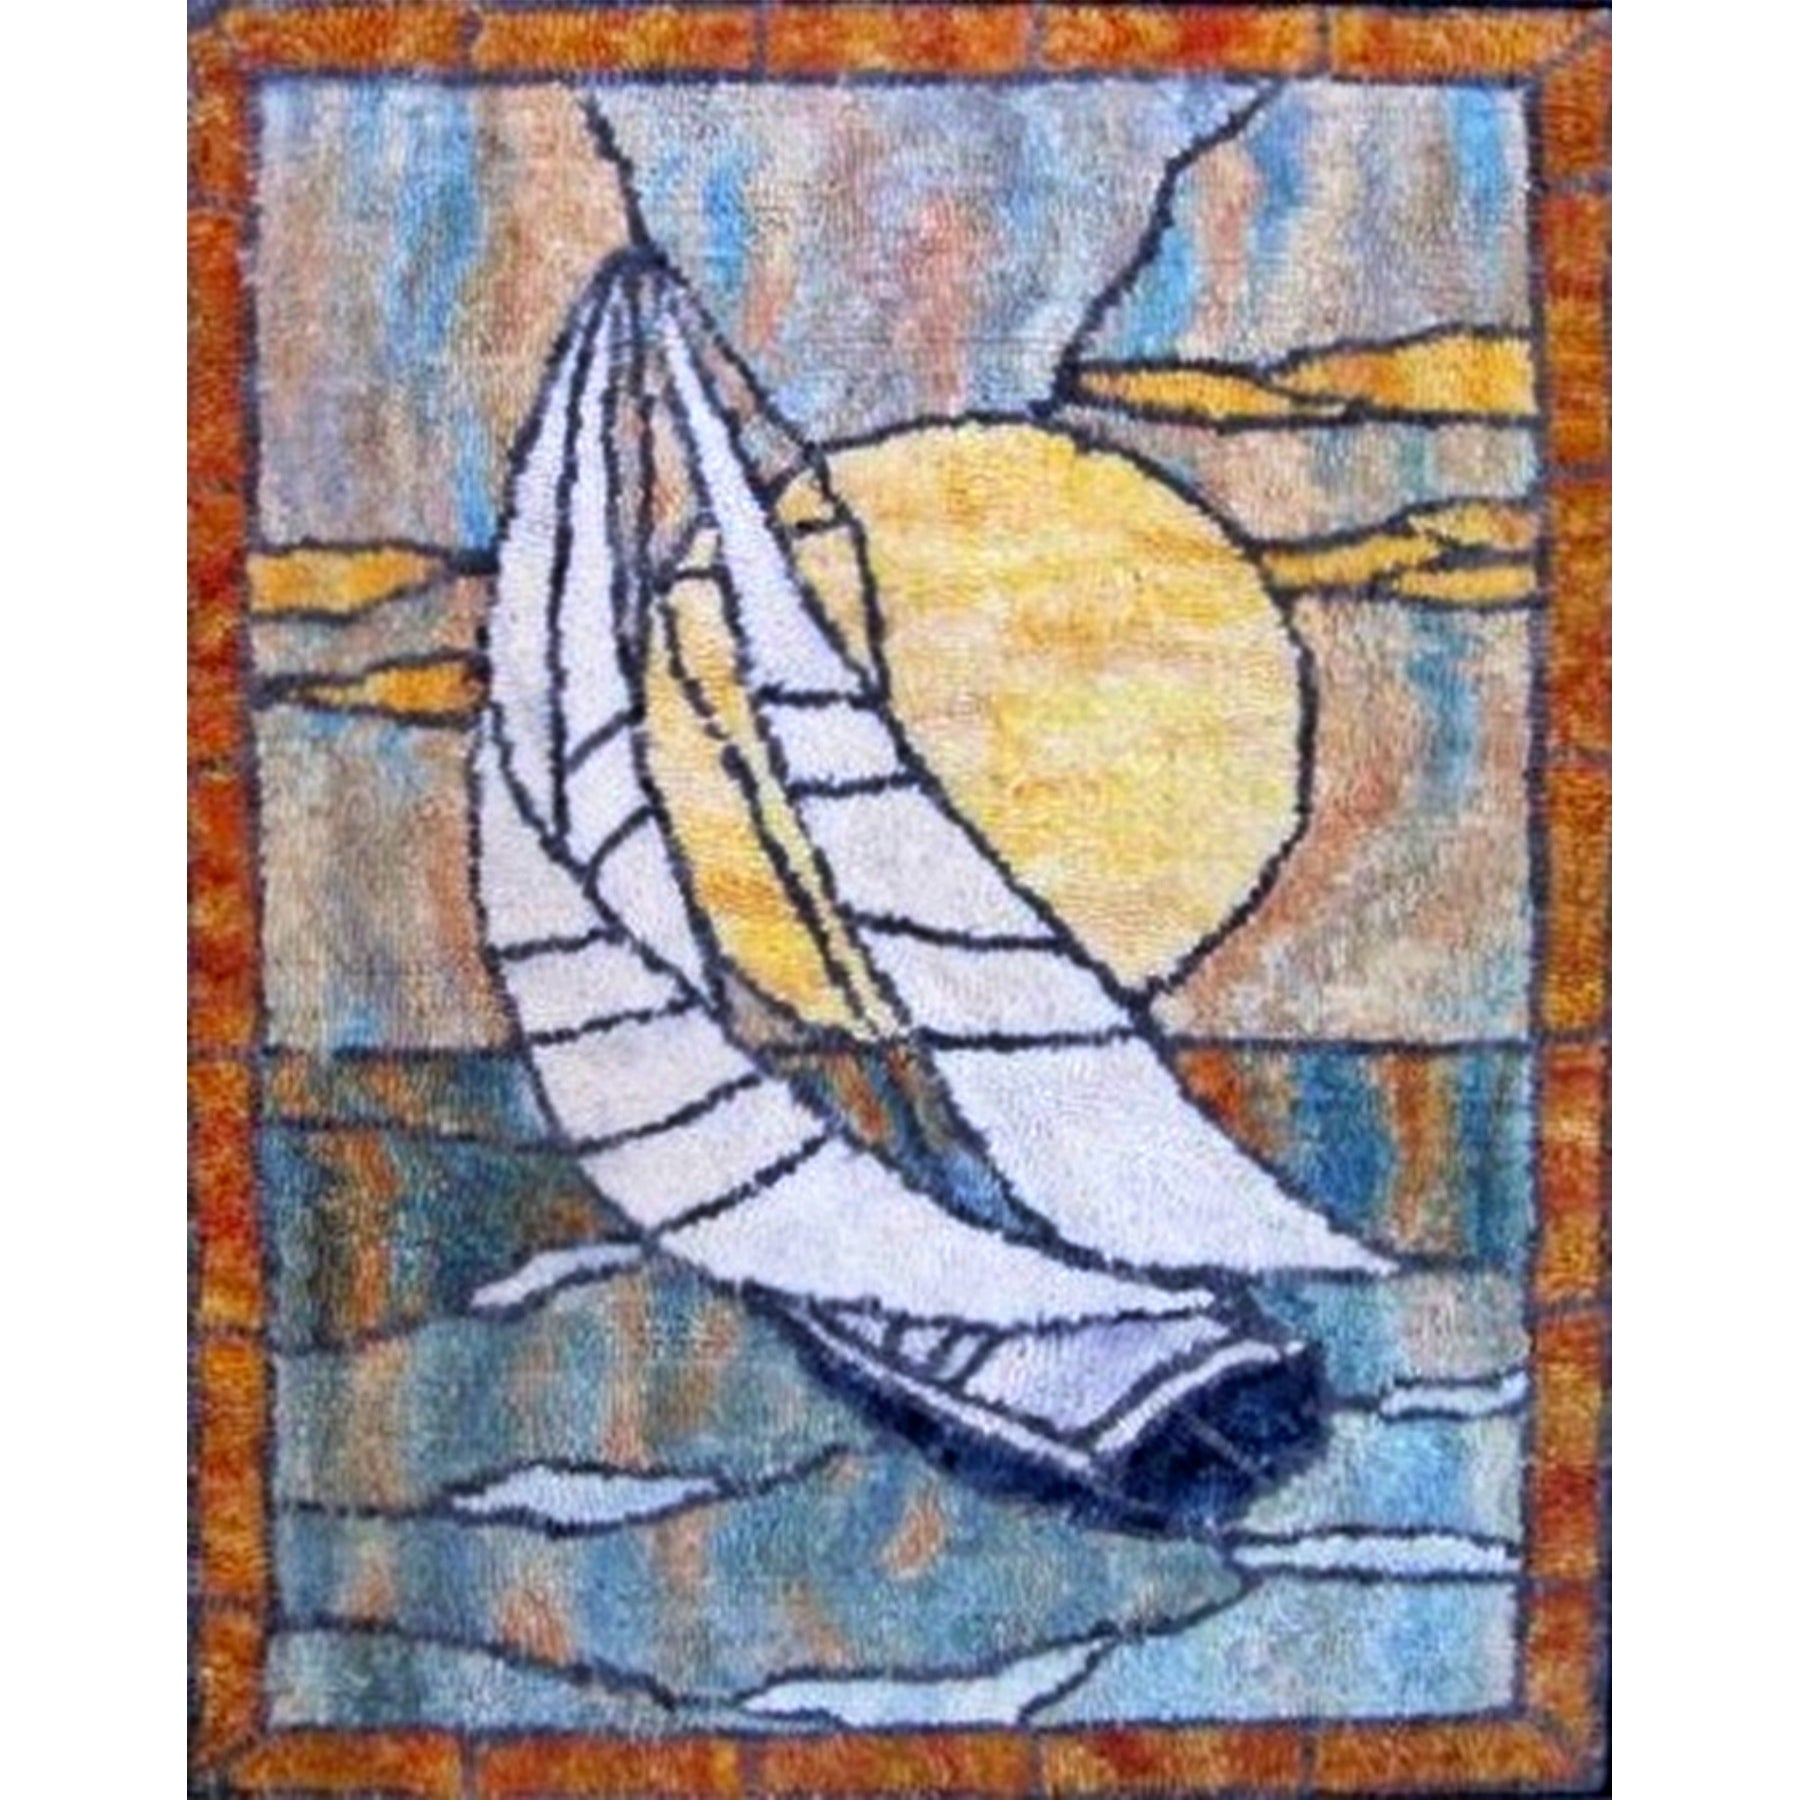 Stained Glass Boat, rug hooked by Sheila Stewart